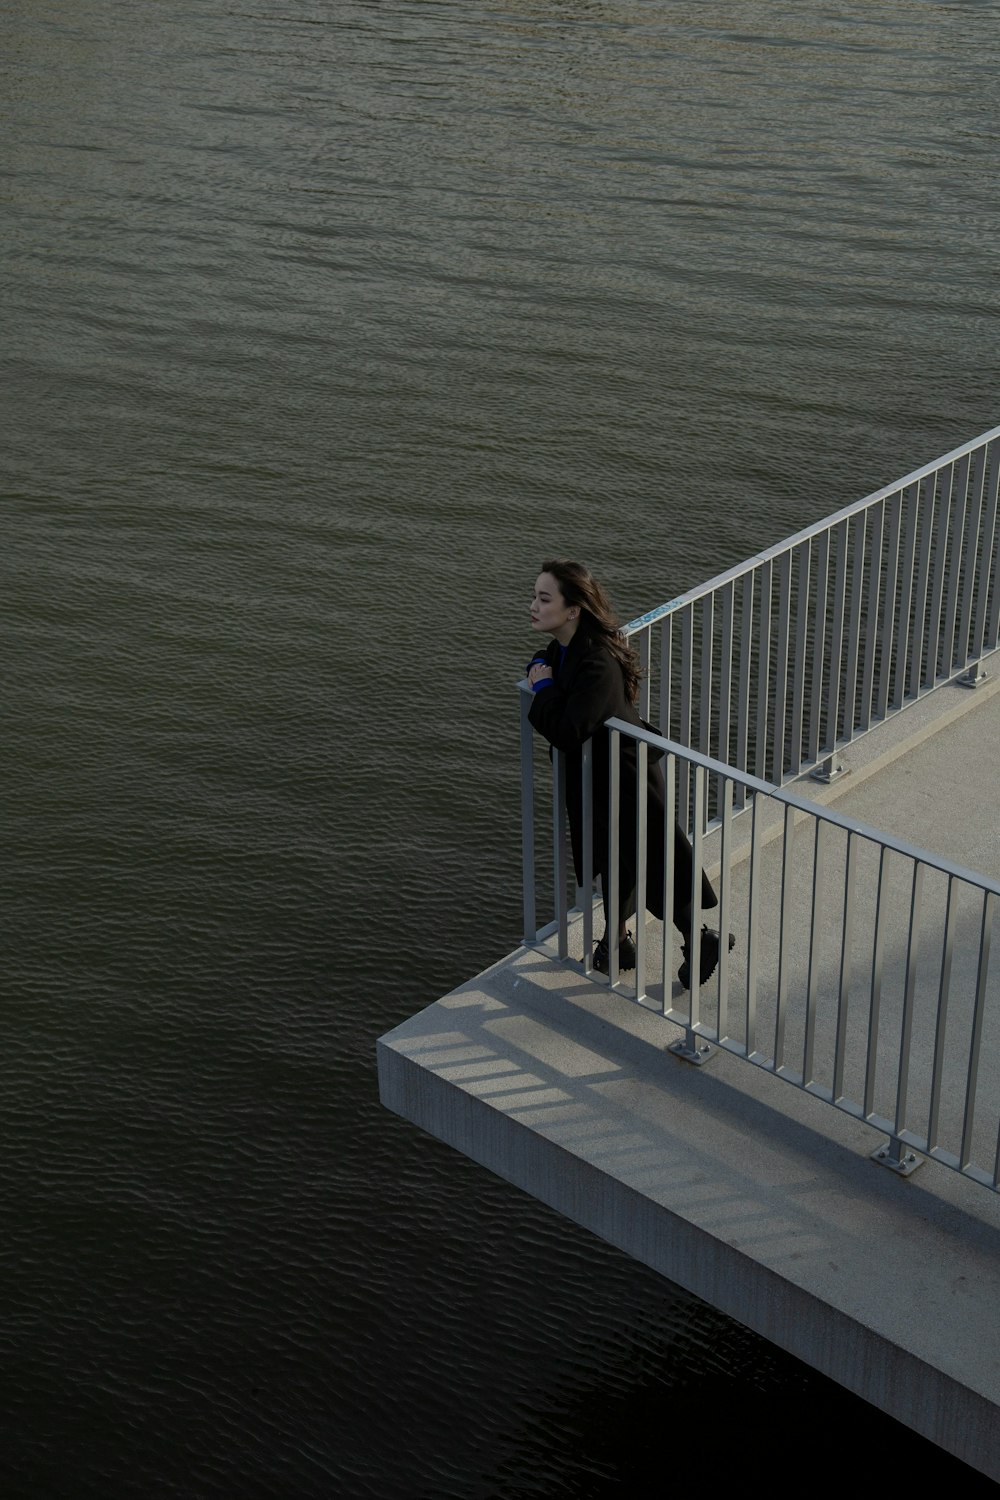 a person standing on a bridge over water